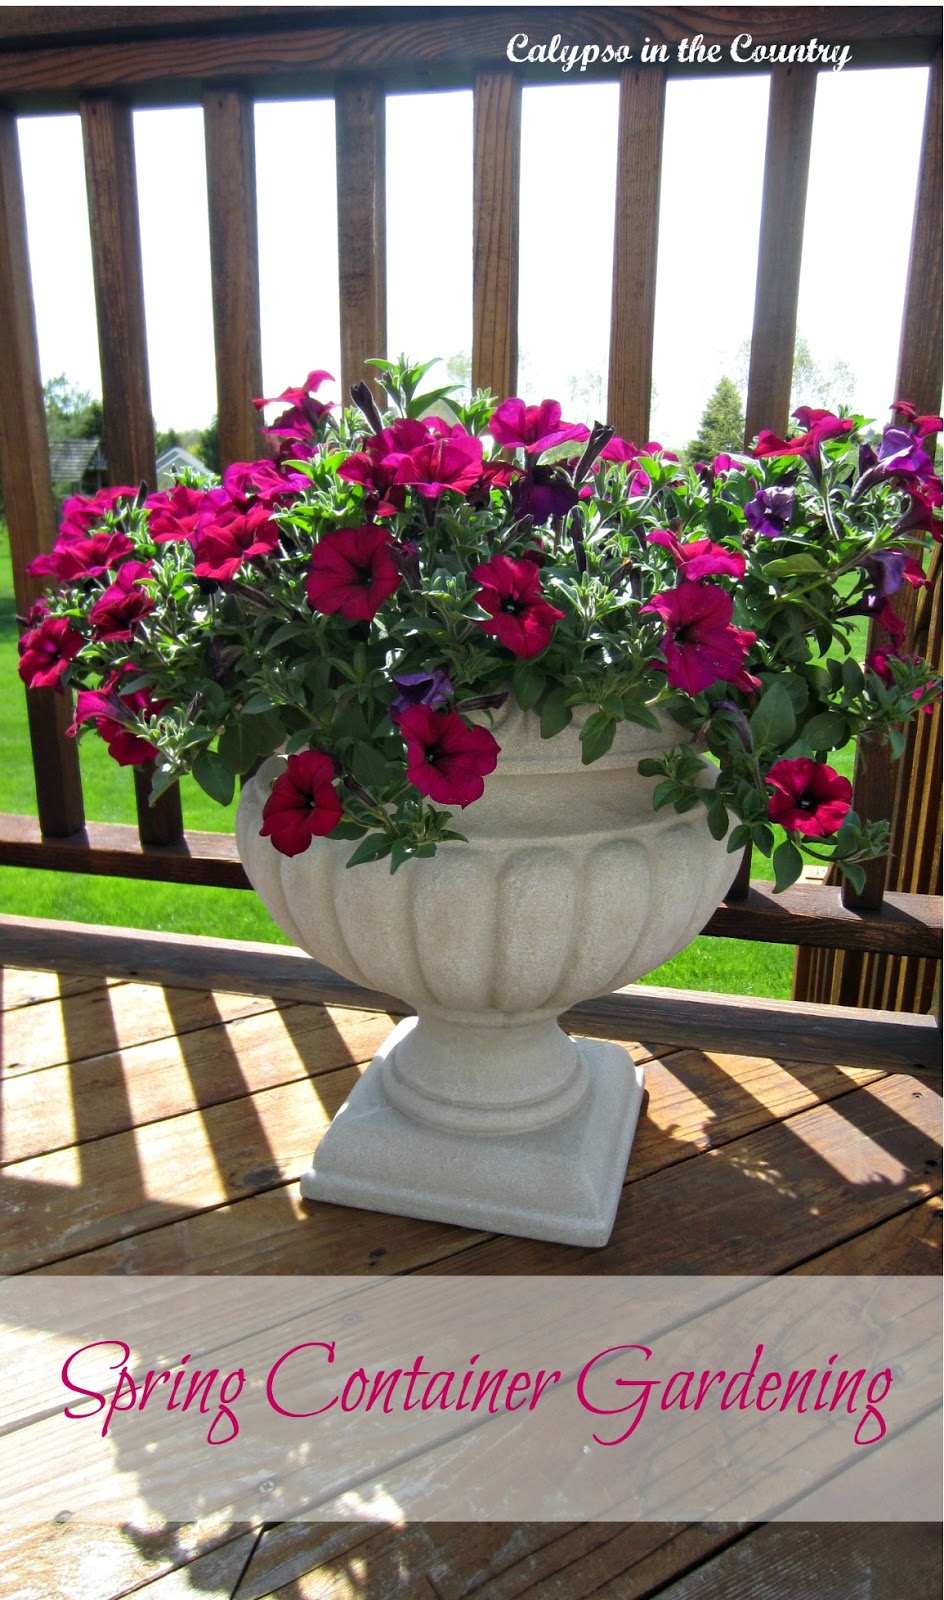 Spring Container Gardening on the deck